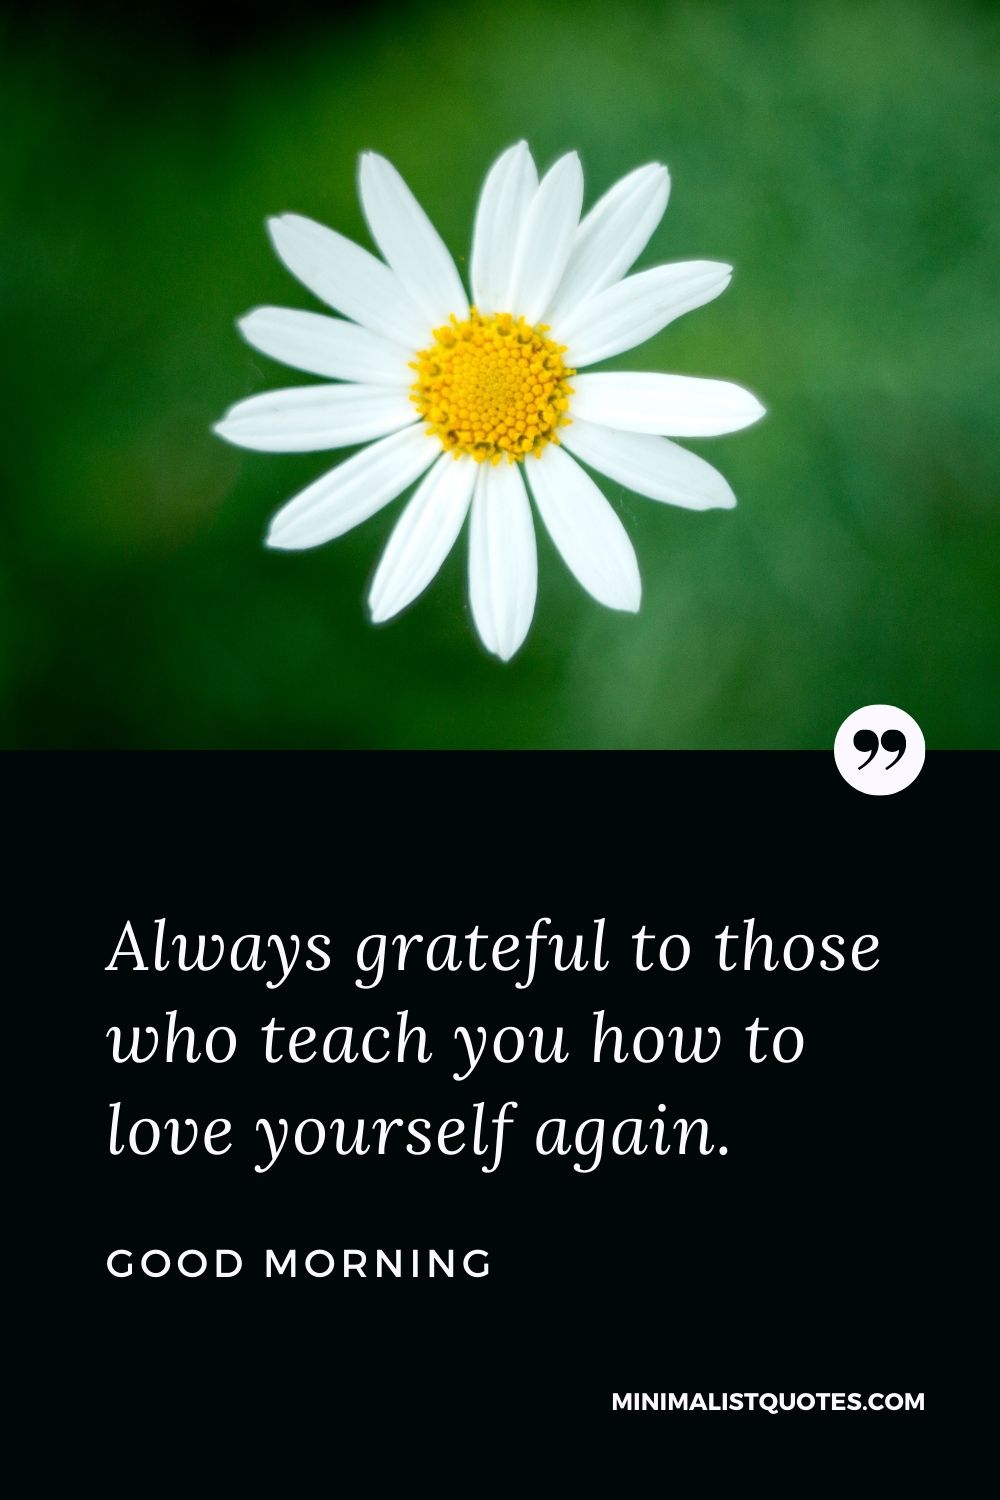 Good Morning Wish & Message With Image: Always grateful to those who teach you how to love yourself again.